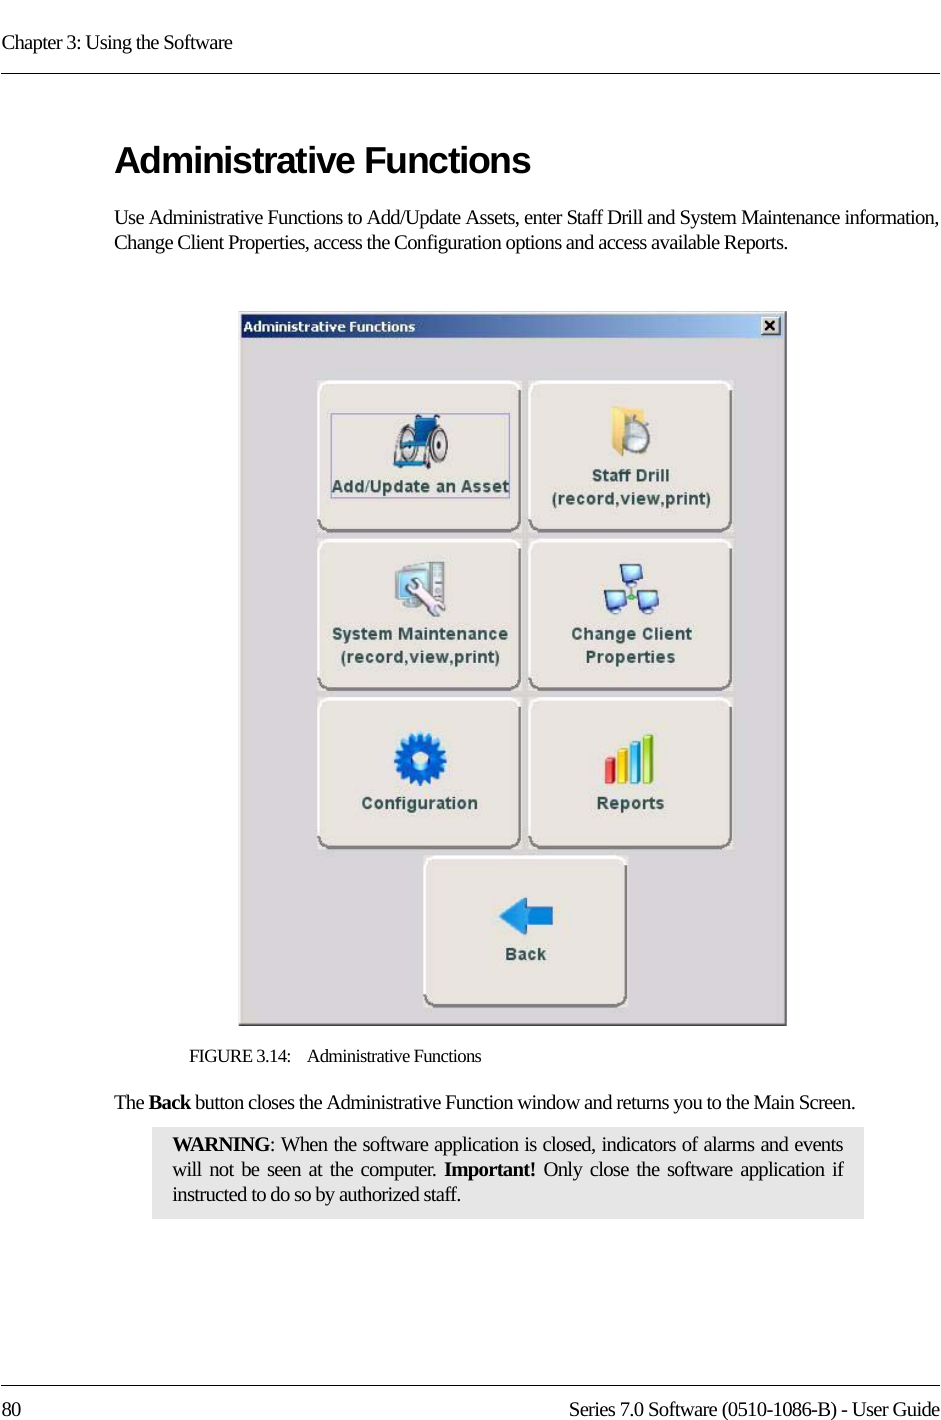 Chapter 3: Using the Software80 Series 7.0 Software (0510-1086-B) - User GuideAdministrative FunctionsUse Administrative Functions to Add/Update Assets, enter Staff Drill and System Maintenance information, Change Client Properties, access the Configuration options and access available Reports.FIGURE 3.14:    Administrative FunctionsThe Back button closes the Administrative Function window and returns you to the Main Screen. WARNING: When the software application is closed, indicators of alarms and events will not be seen at the computer. Important! Only close the software application if instructed to do so by authorized staff.